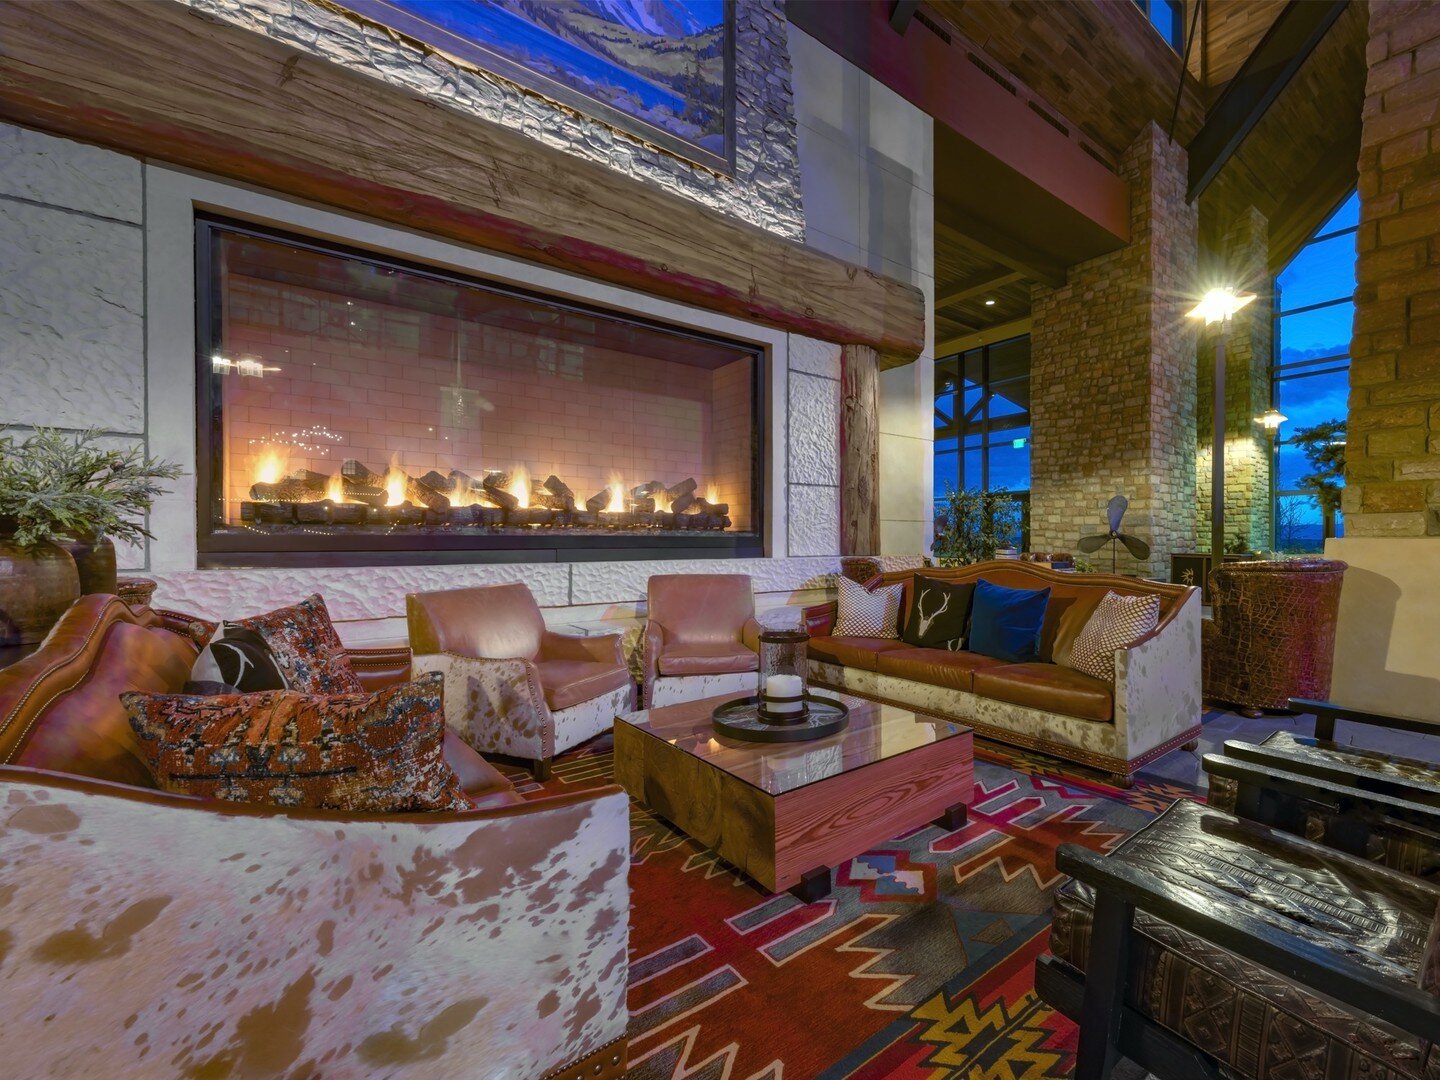 @montigofire Divine Series residential fireplaces were used to furnish the Gaylord guest suites with warm and sophisticated comfort. The Divine H36PV fireplace was the perfect addition to each of the resort&rsquo;s 14 exquisite Presidential Suites.

